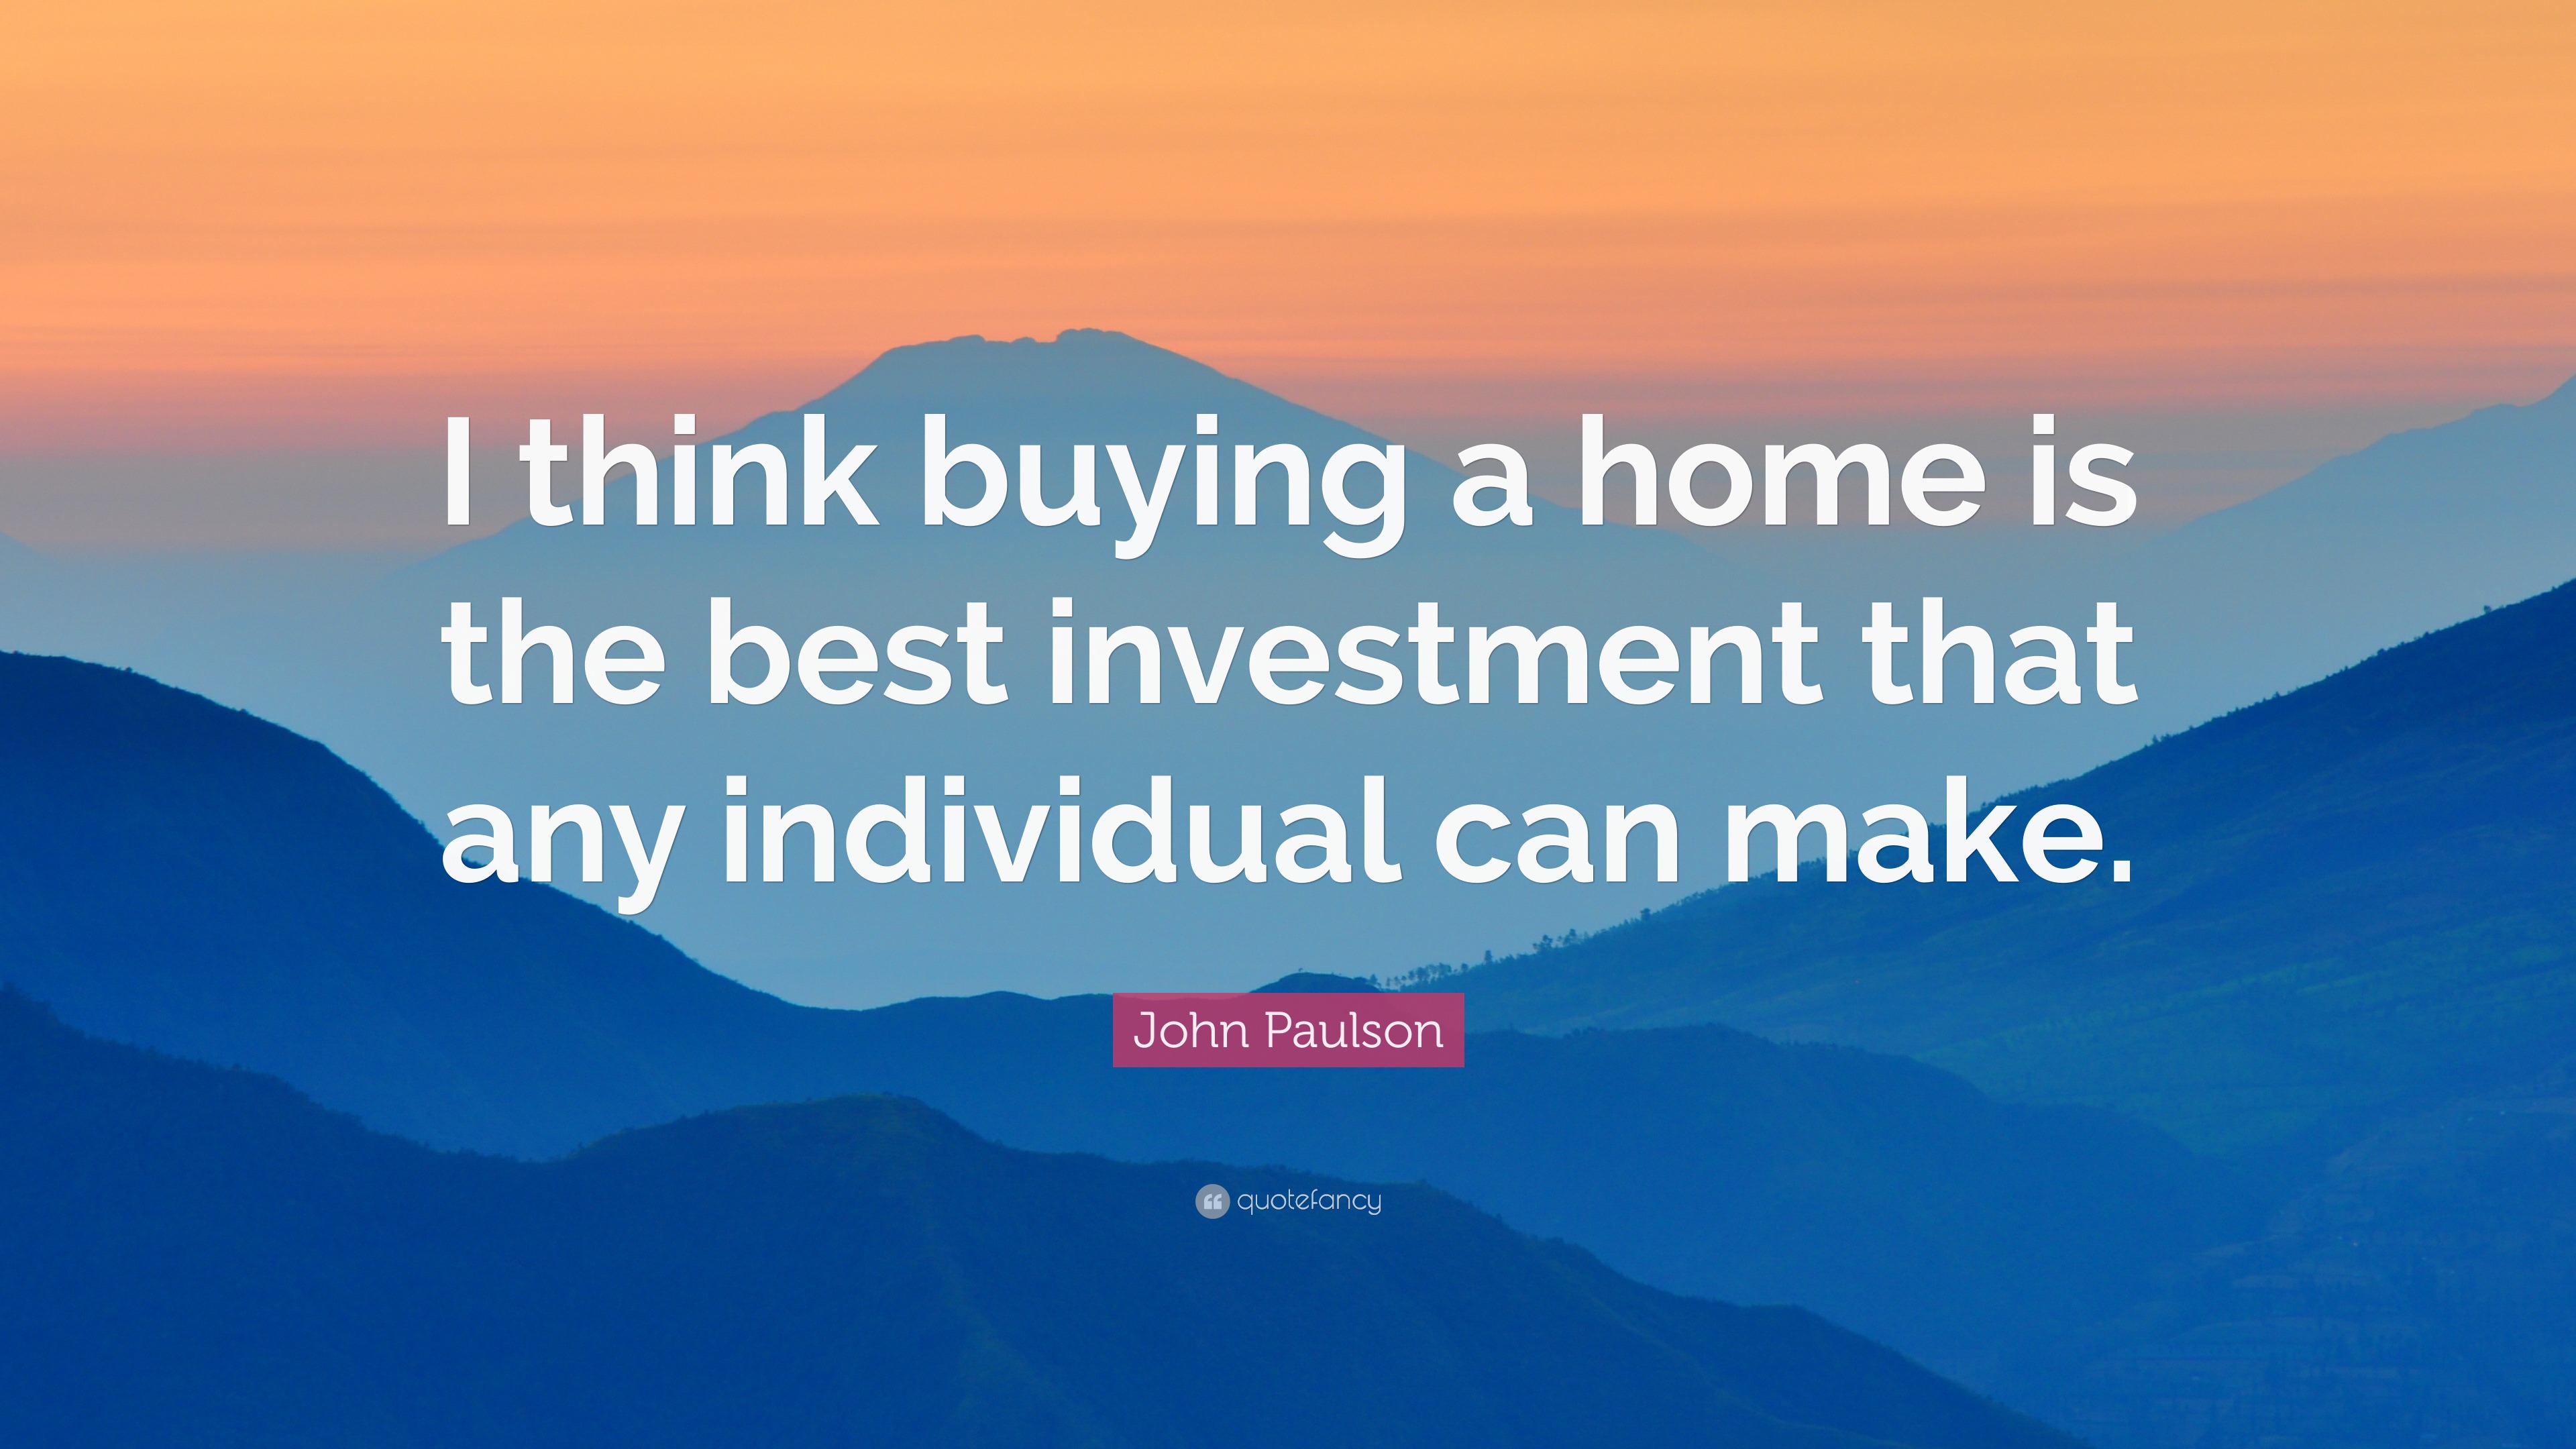 John Paulson Quote: “I think buying a home is the best investment that